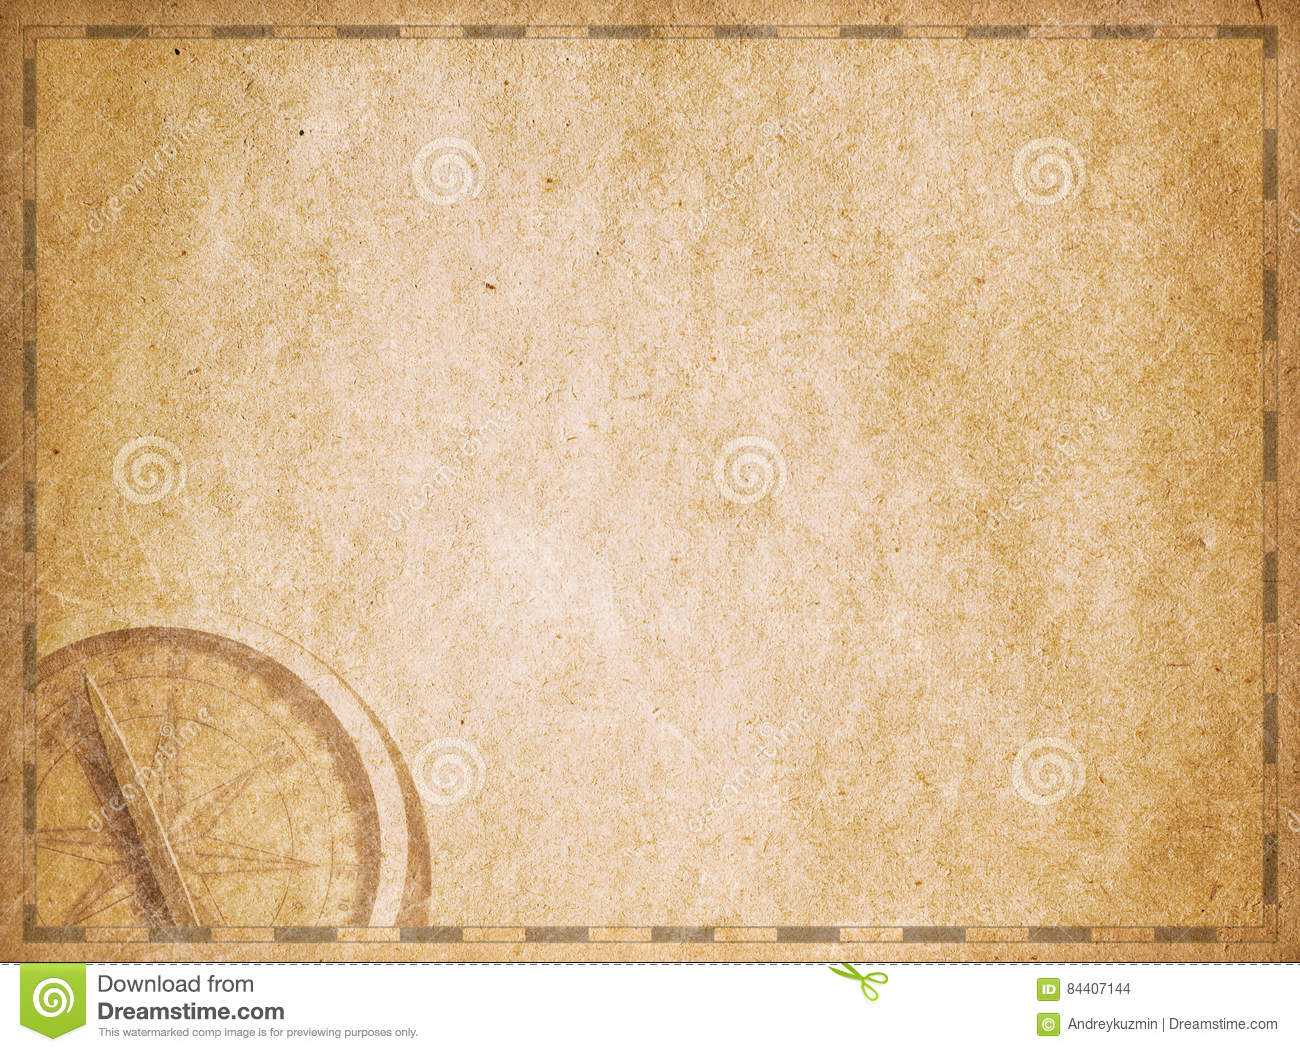 Blank Pirates Map Background. Stock Illustration With Blank Pirate Map Template